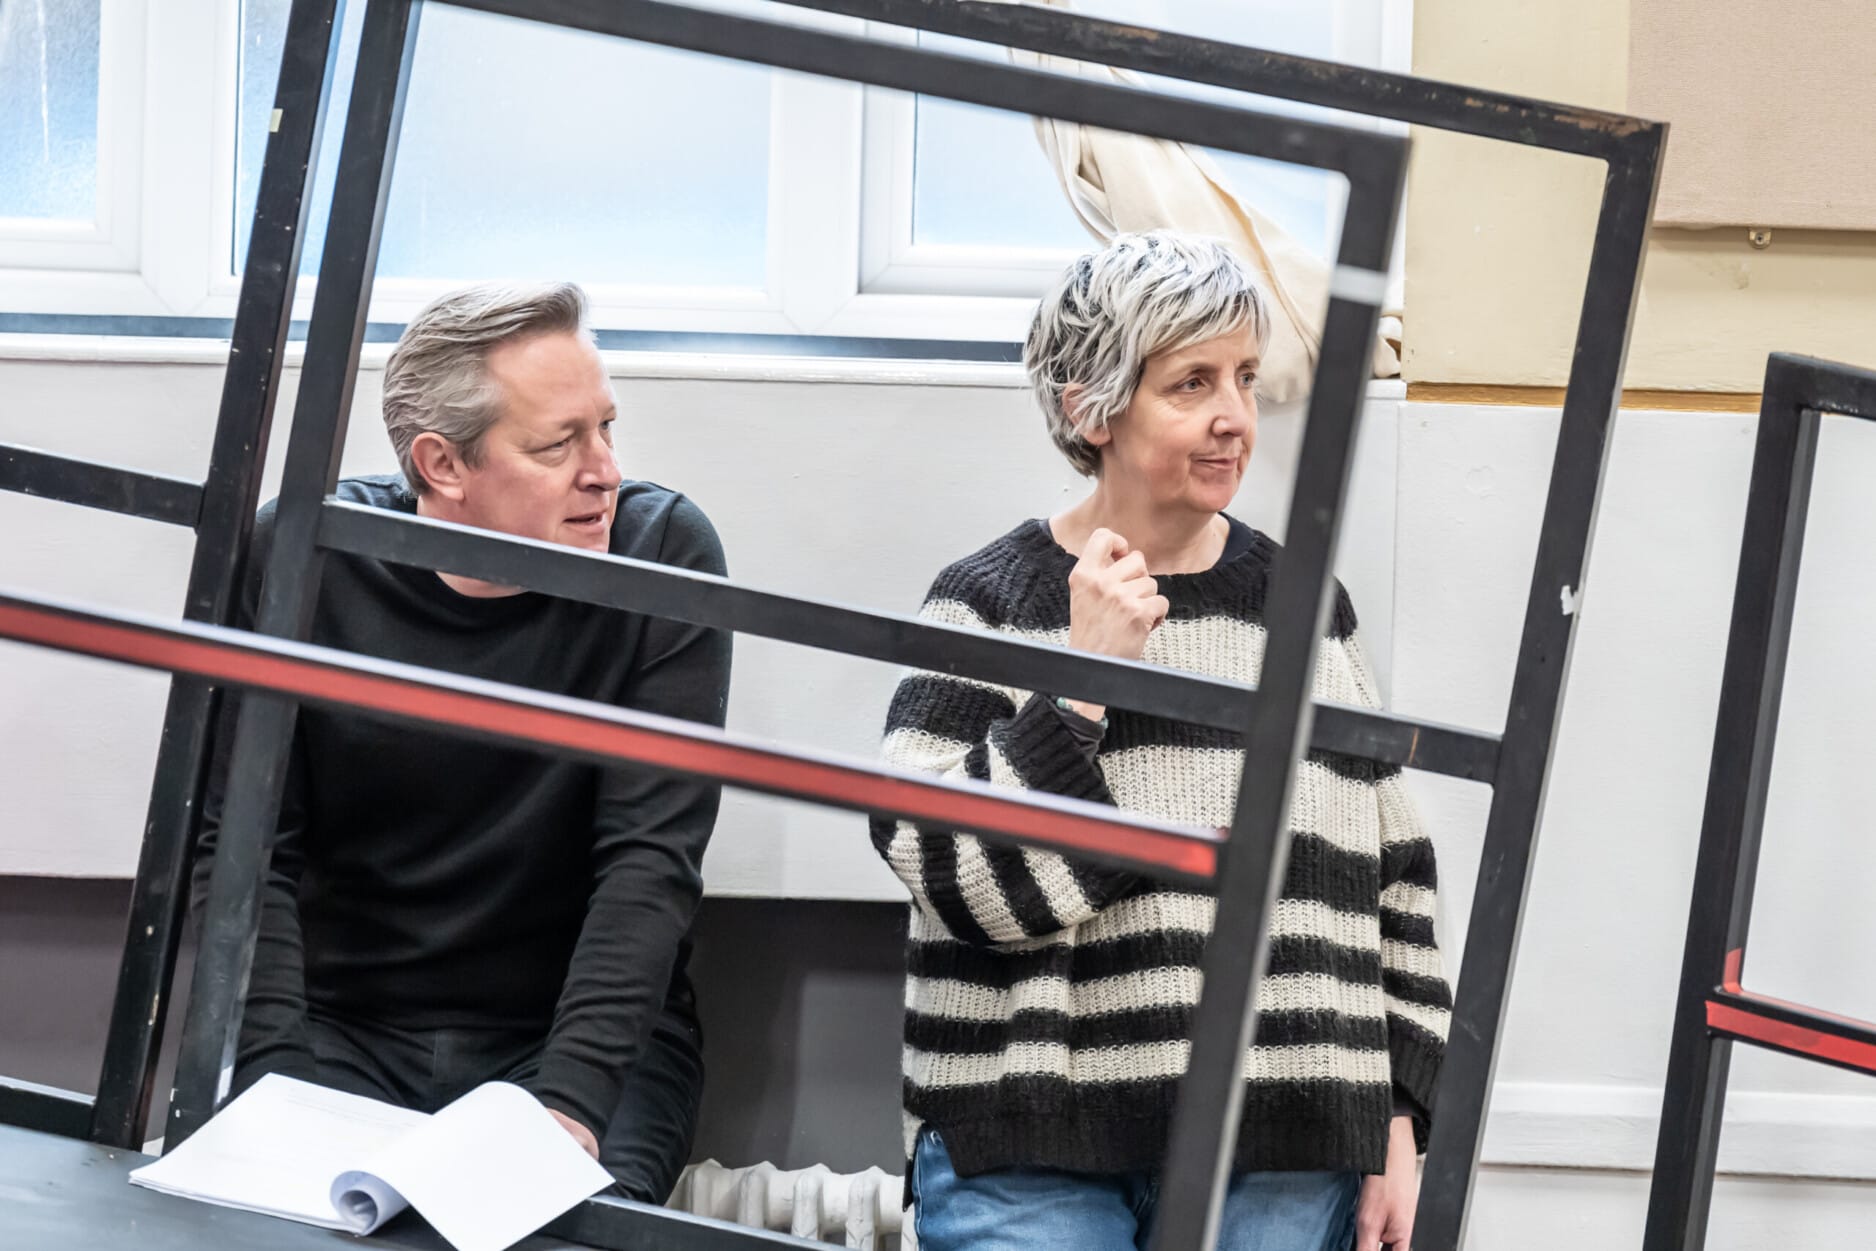 Tony Hirst and Julie Hesmondhalgh in rehearsal for Punch. Photo by Marc Brenner.